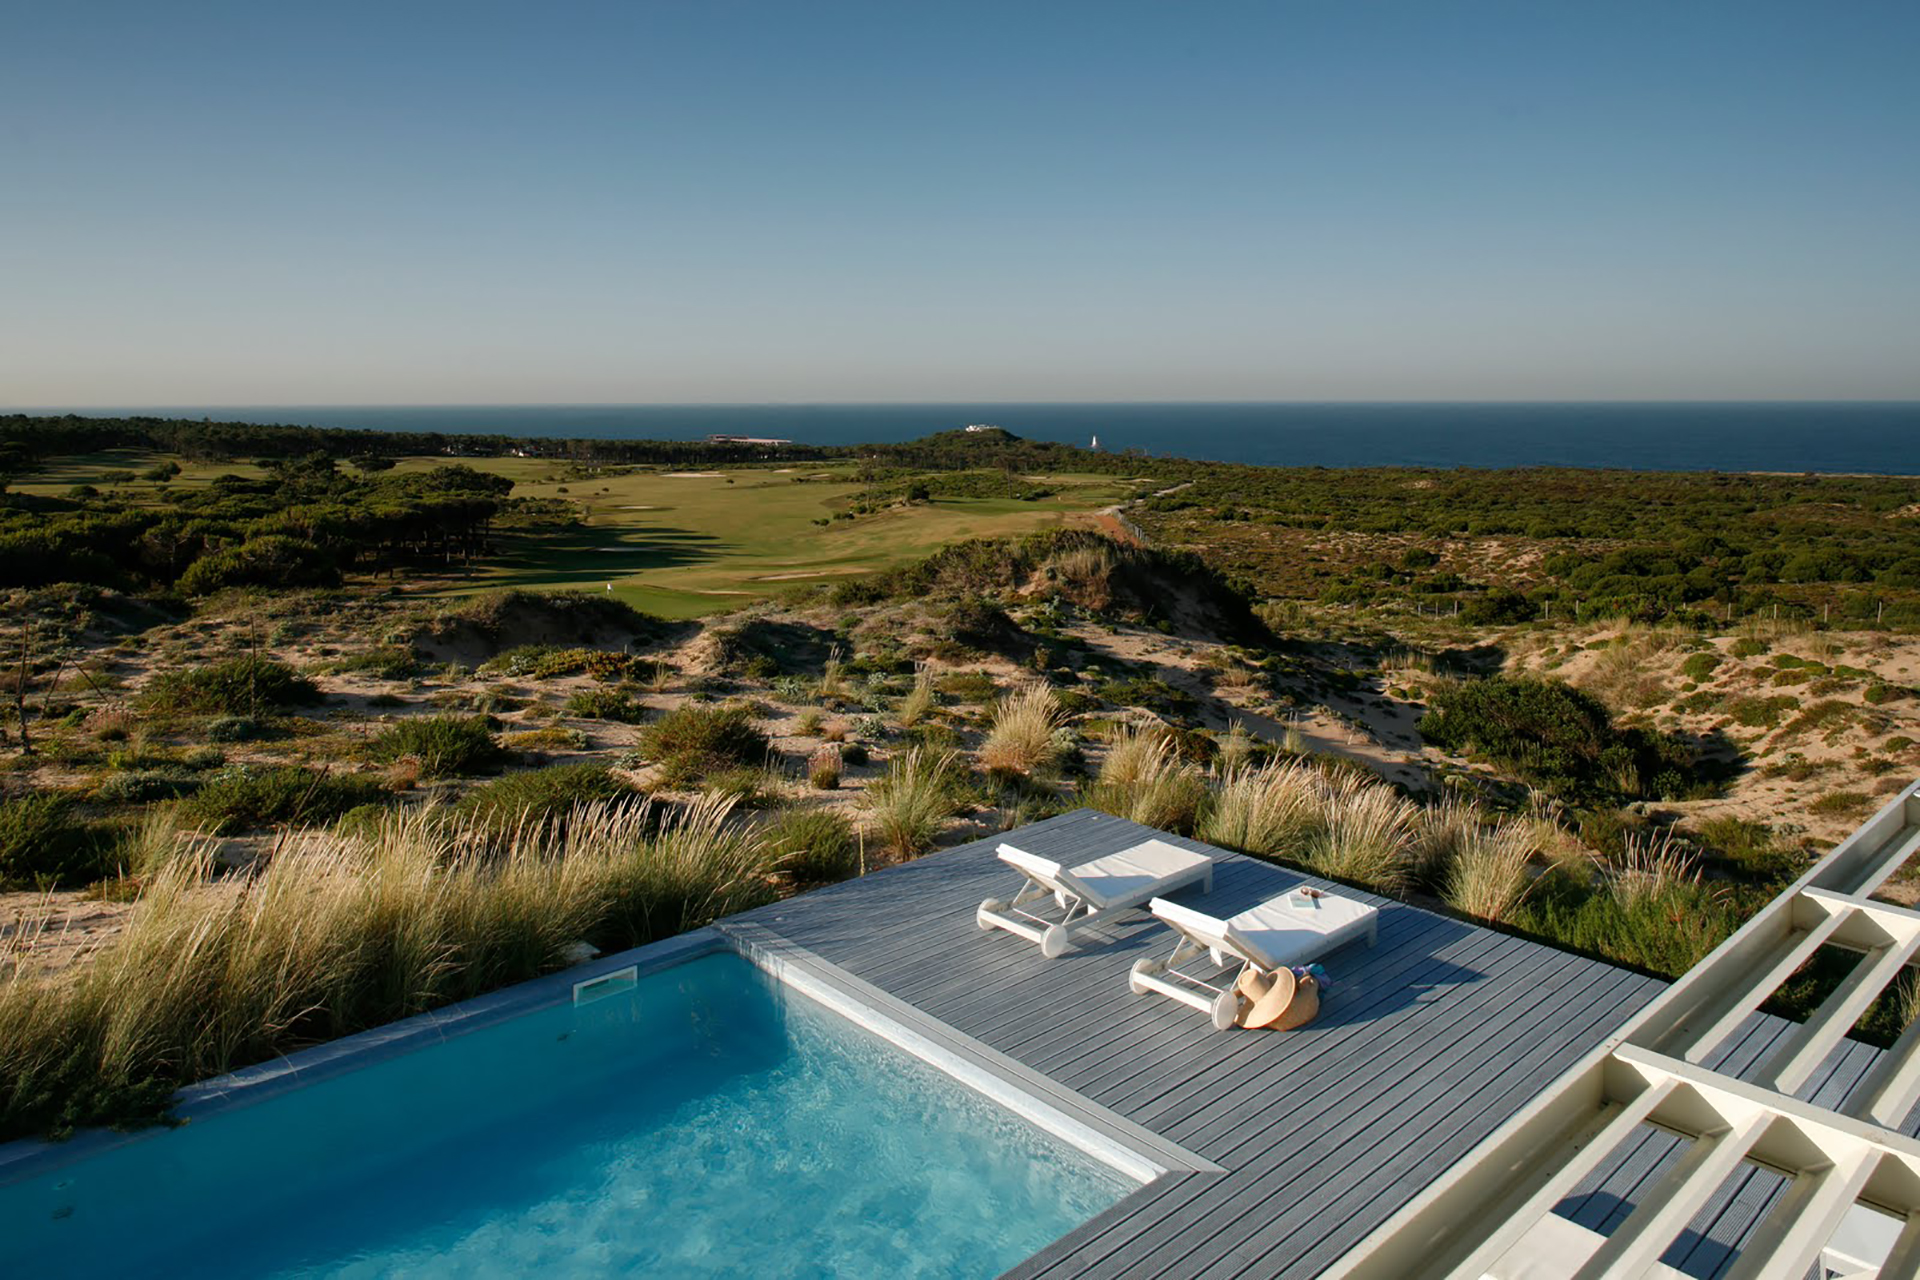 Golf-expedition-golfreizen-golfresort-Royal-The-Oitavos-Hotel-pool-with-a-view